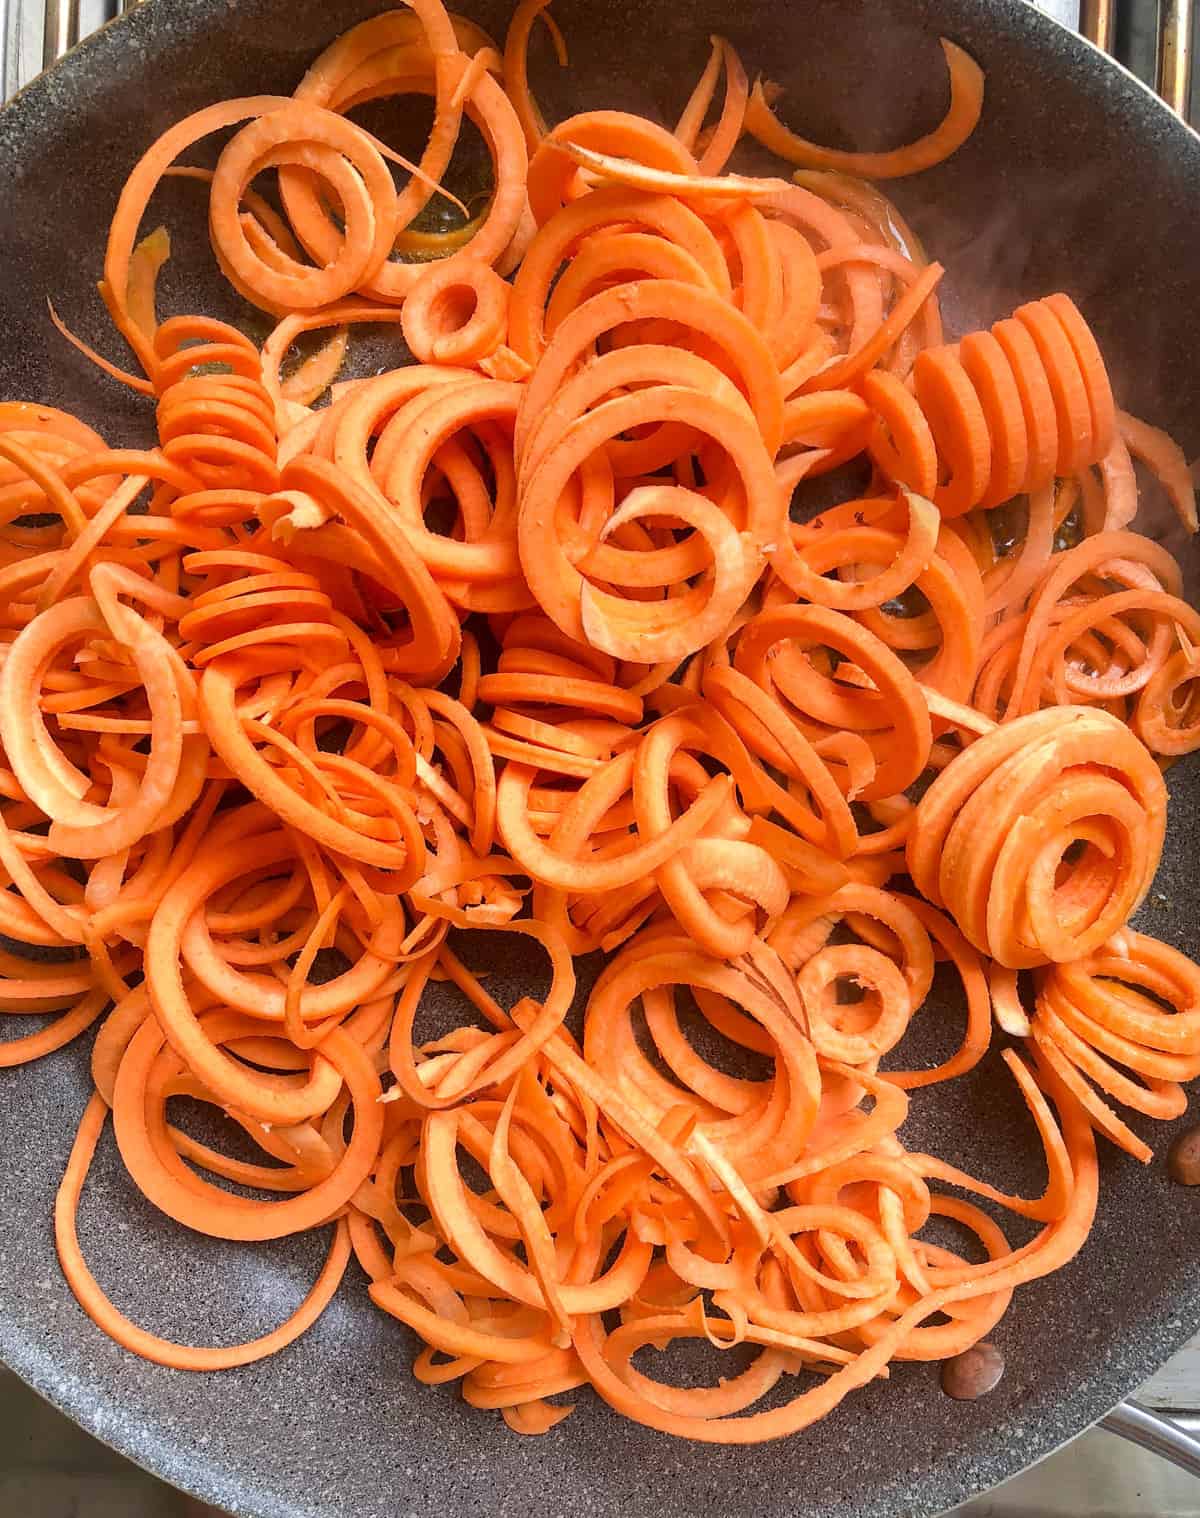 Add the spiralized sweetpotatoes to the pan and sauté for 5-7 minutes.